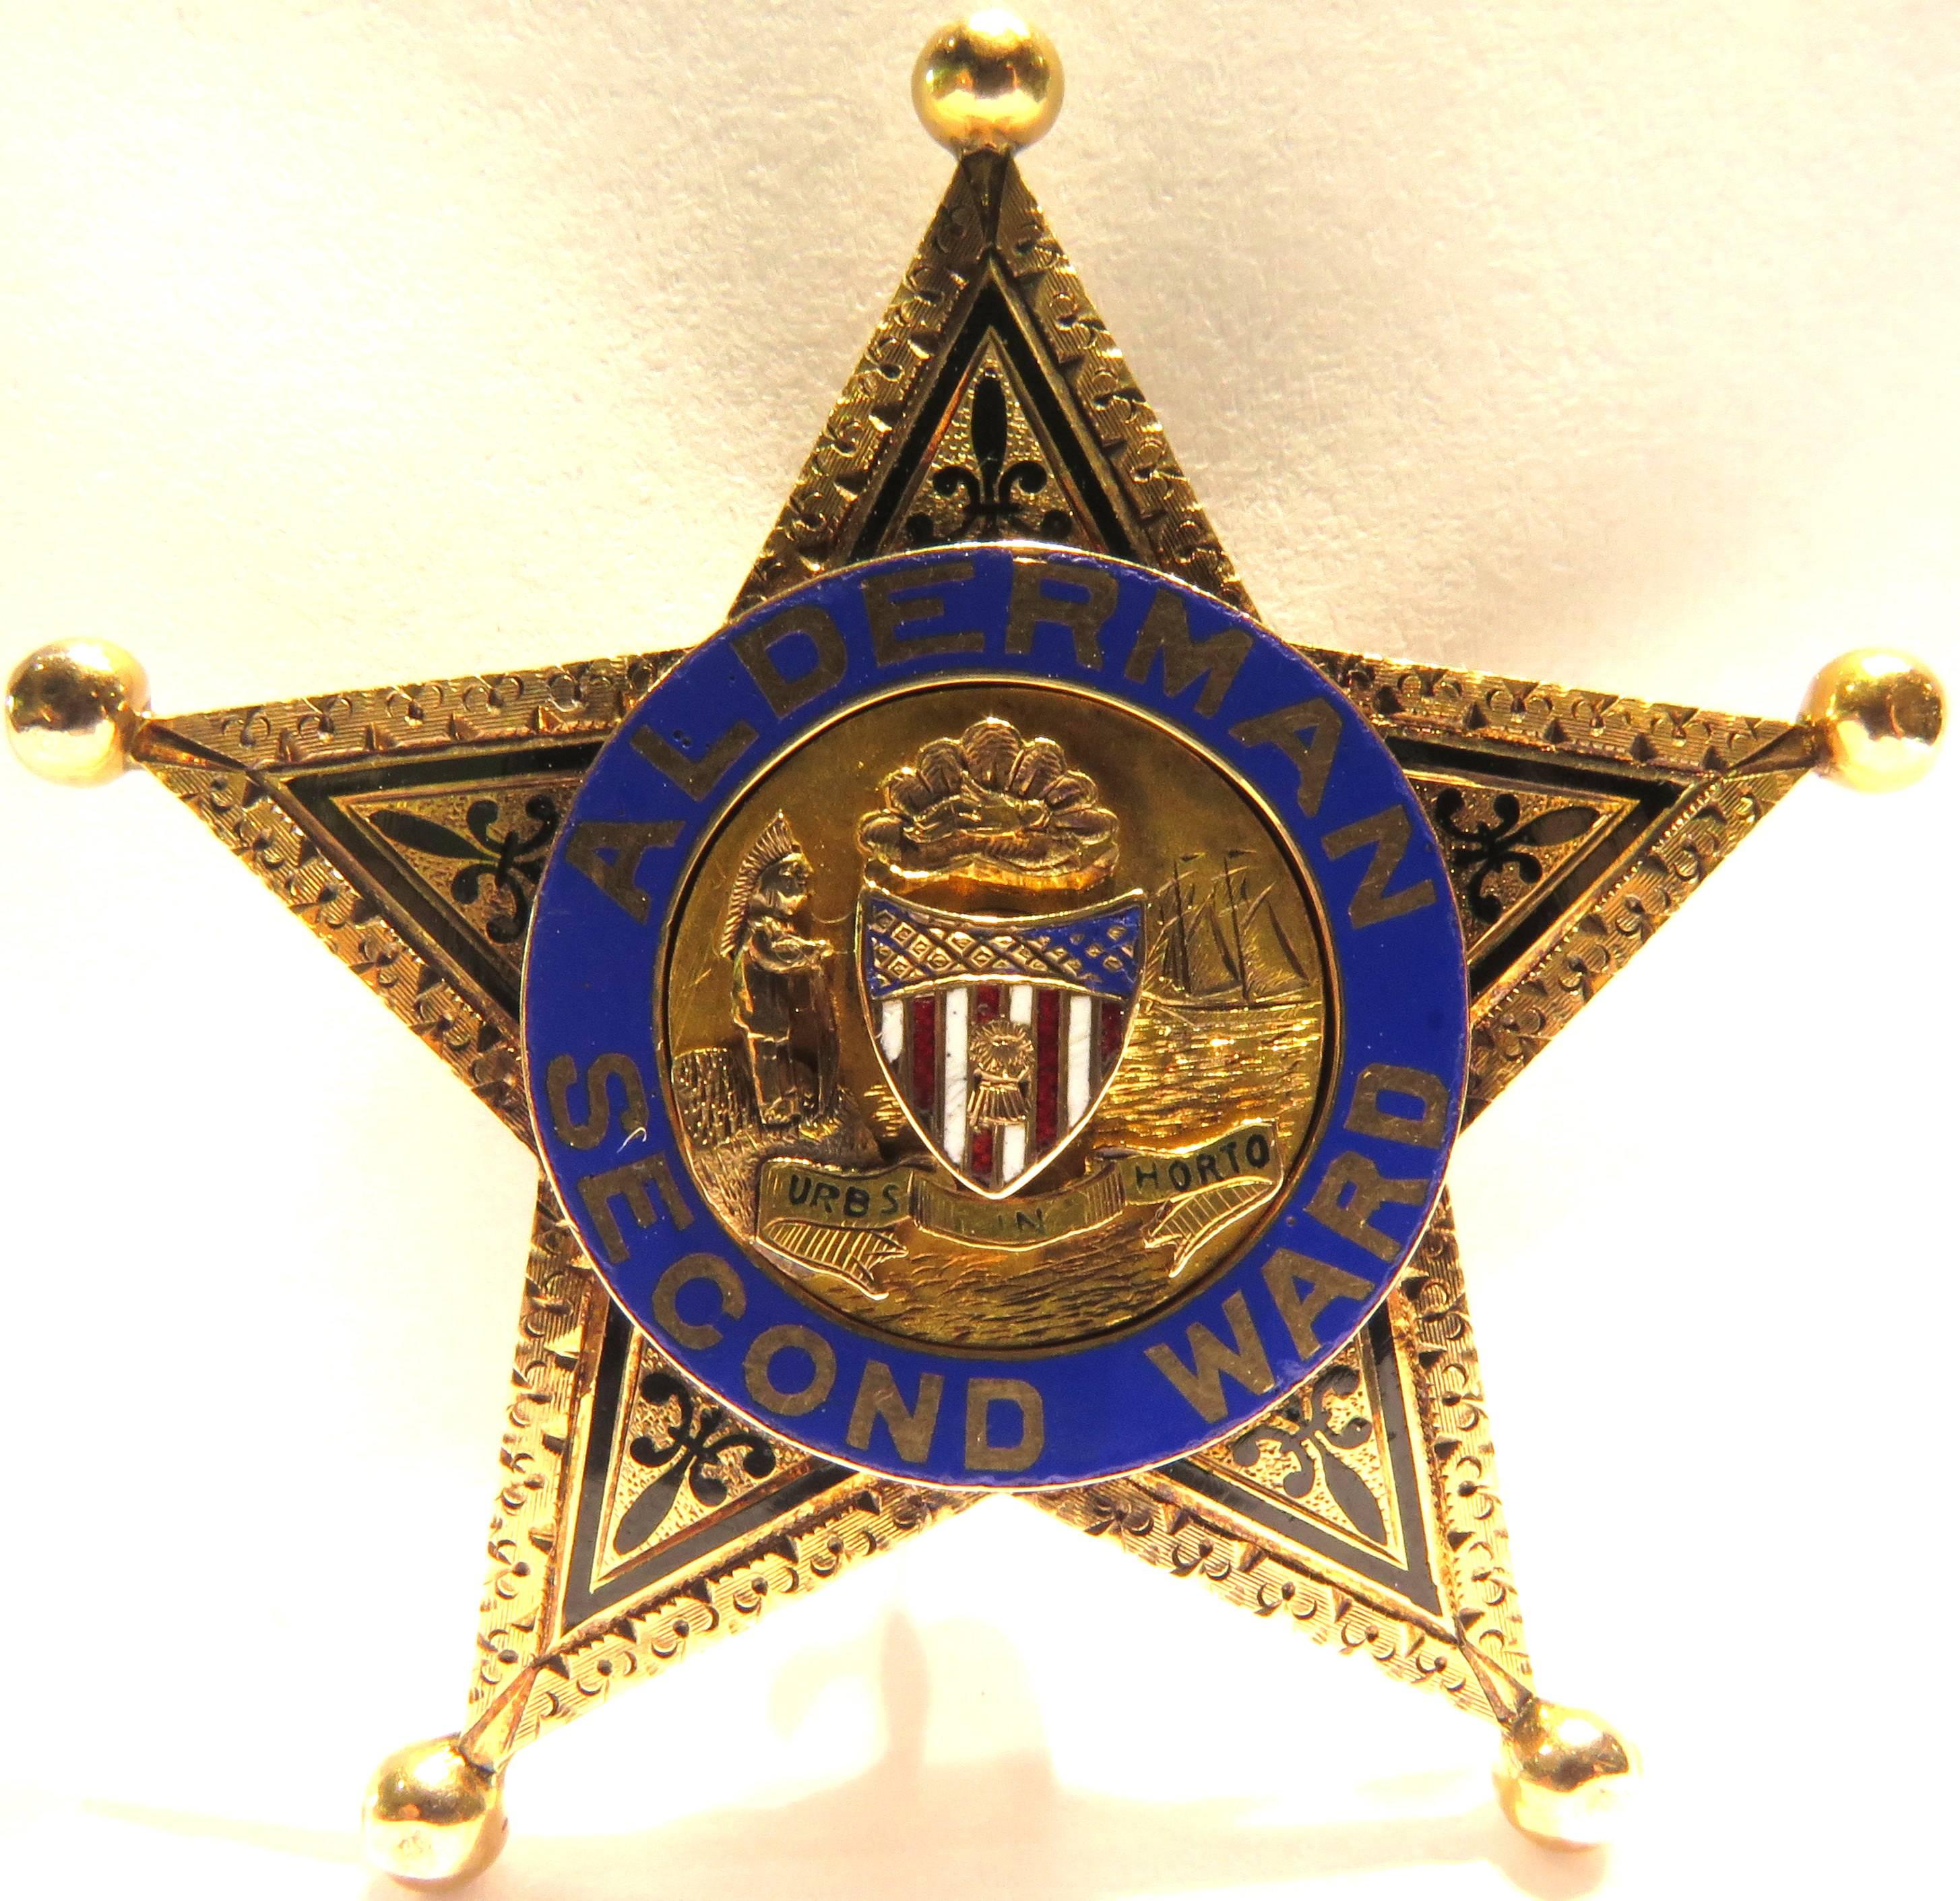 This extremely rare 14k gold Alderman police badge is perfect for even the most finicky of collectors. Under the city crest is a ribbon with the words "Urbs in horto". In the 1830s, Chicago's emerging government adopted the motto